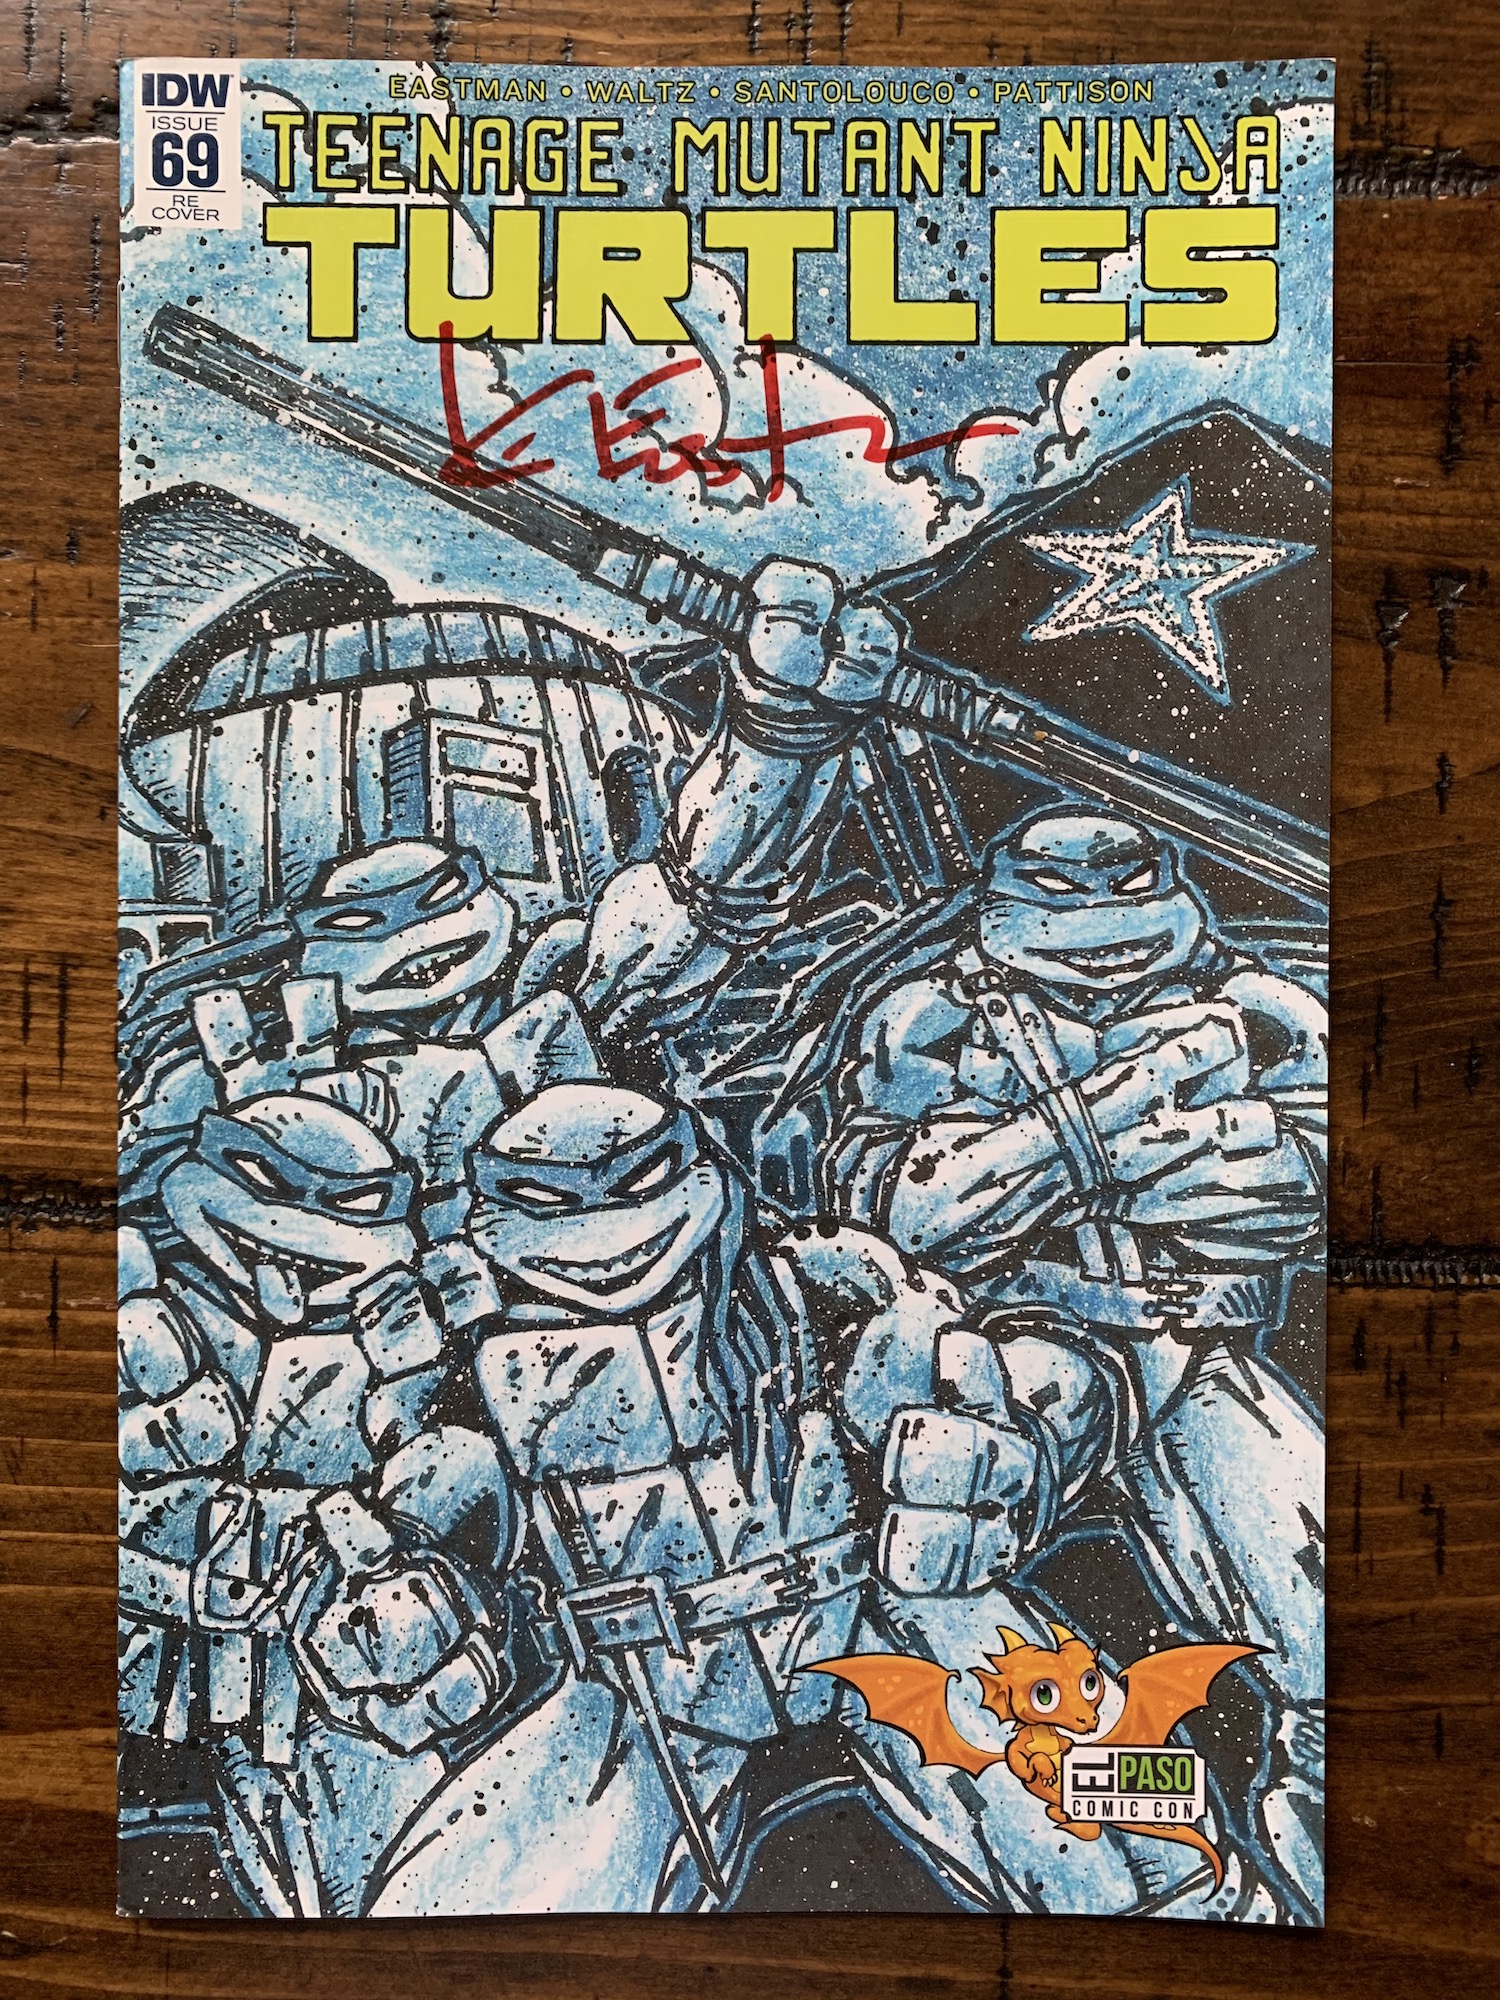 TMNT Issue 69 El Paso Variant – Signed Back In Stock